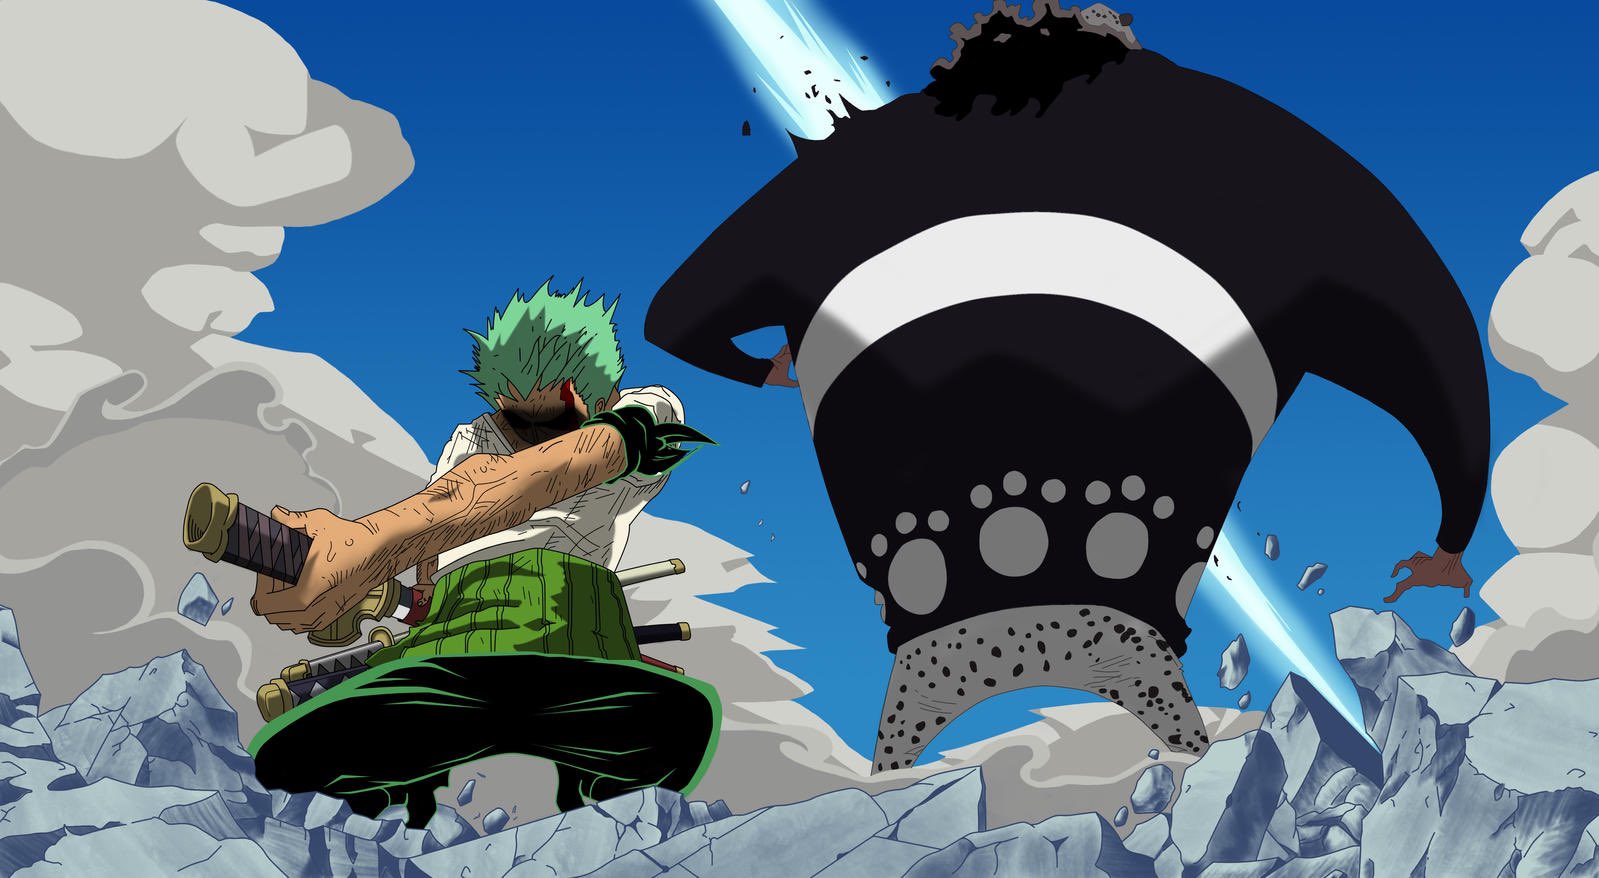 YonkouProductions on X: One Piece Episodes 1054 - 1057 Staff and Titles   / X